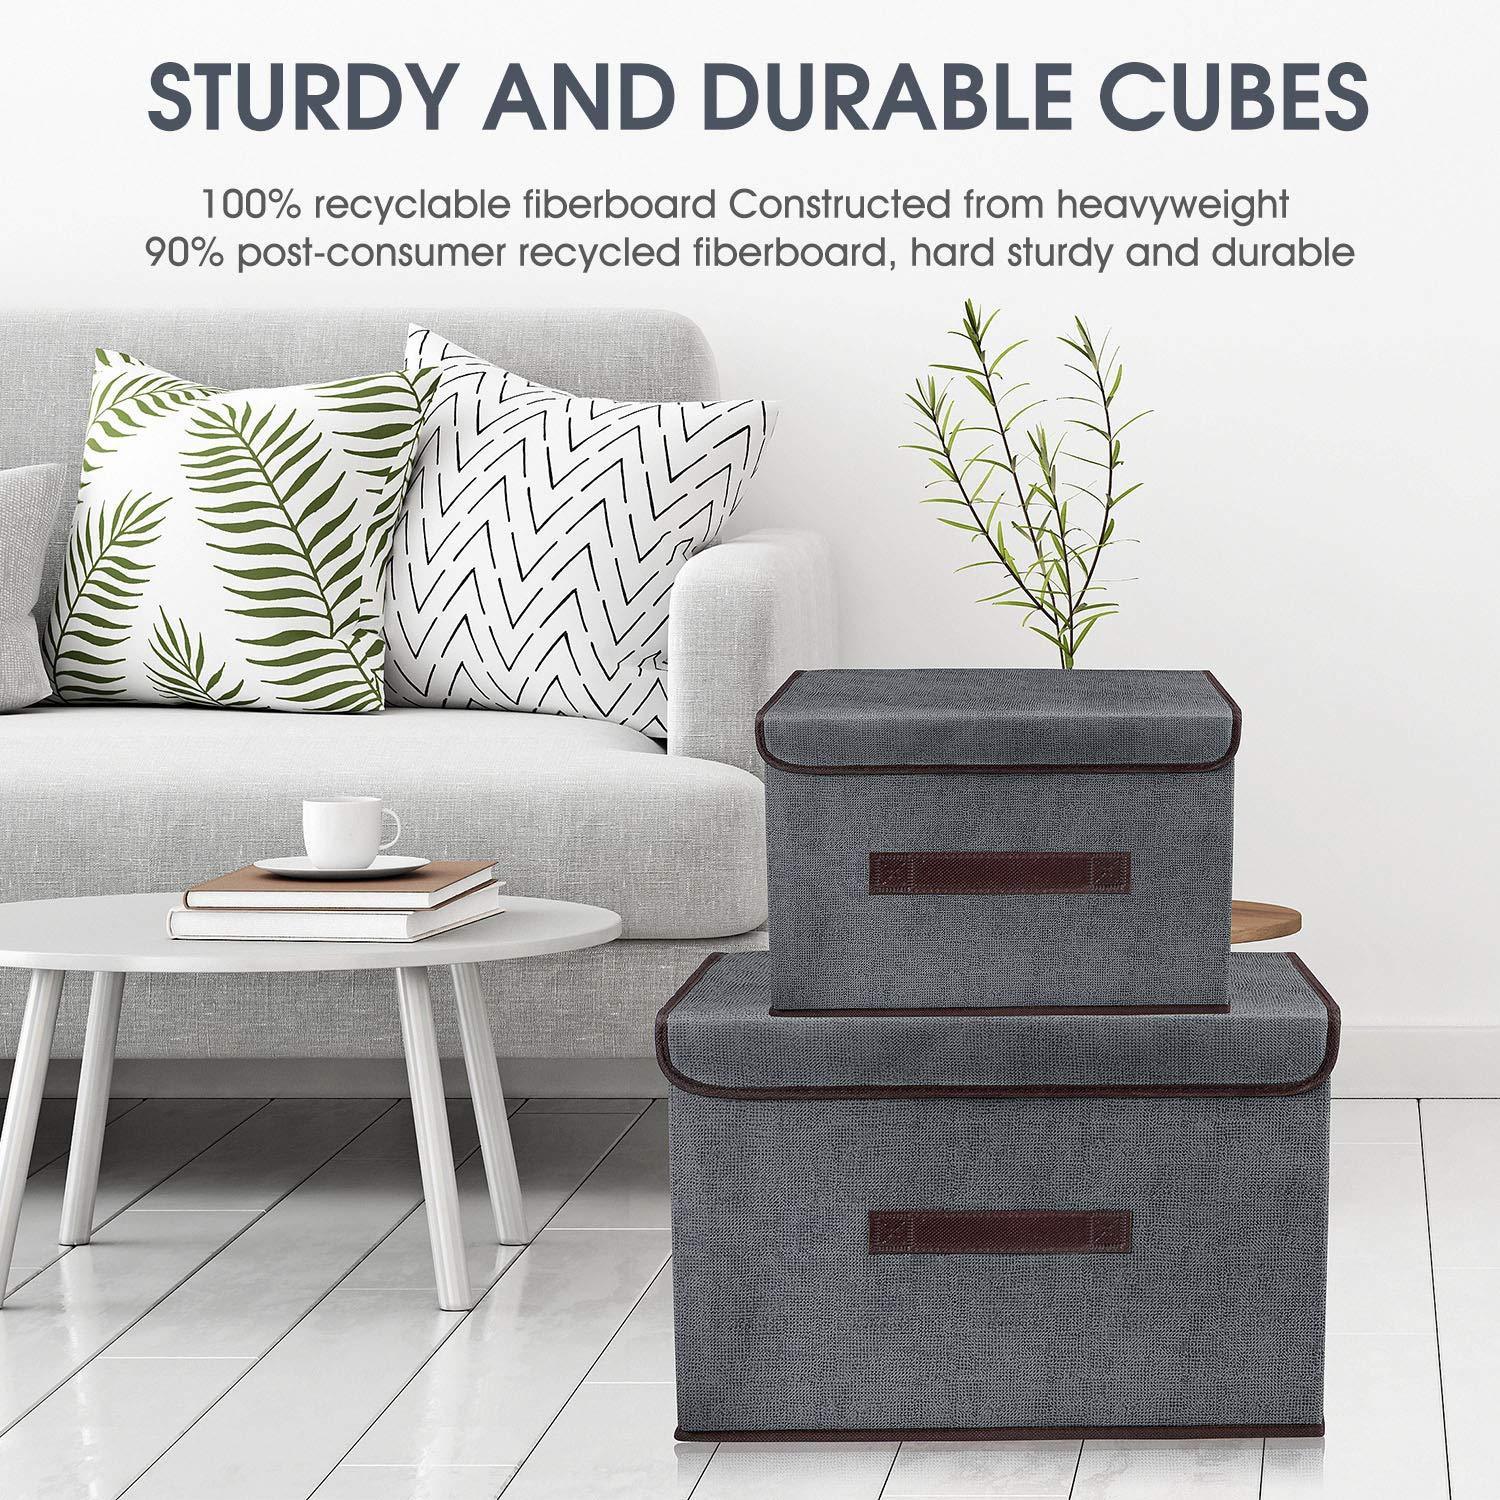 Heavy duty foldable storage boxes with lids 2 set of linen fabric cubes with handles for shelf closet book kid toy nursery organize grey